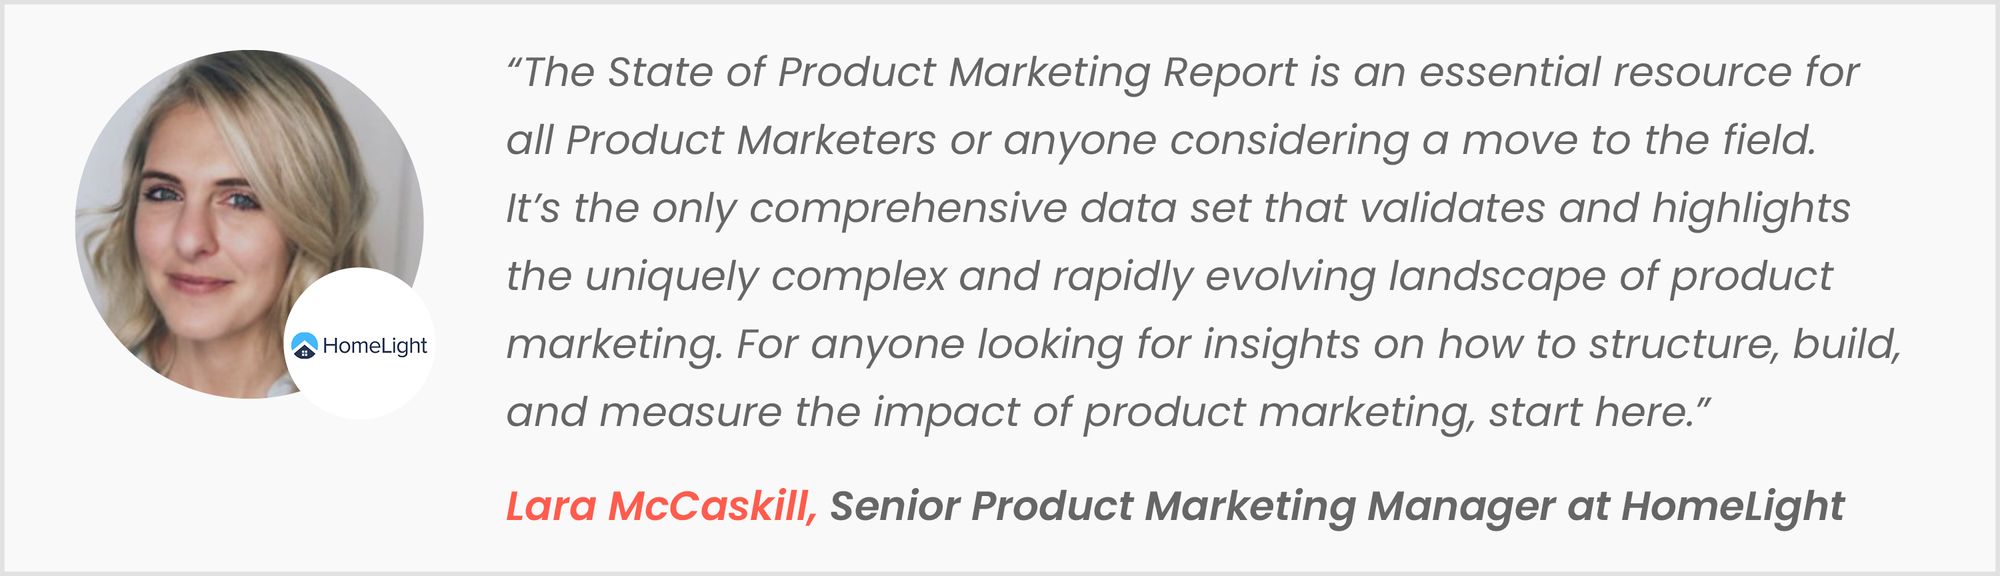 Lara McCaskill's thoughts on the State of Product Marketing Report 2021